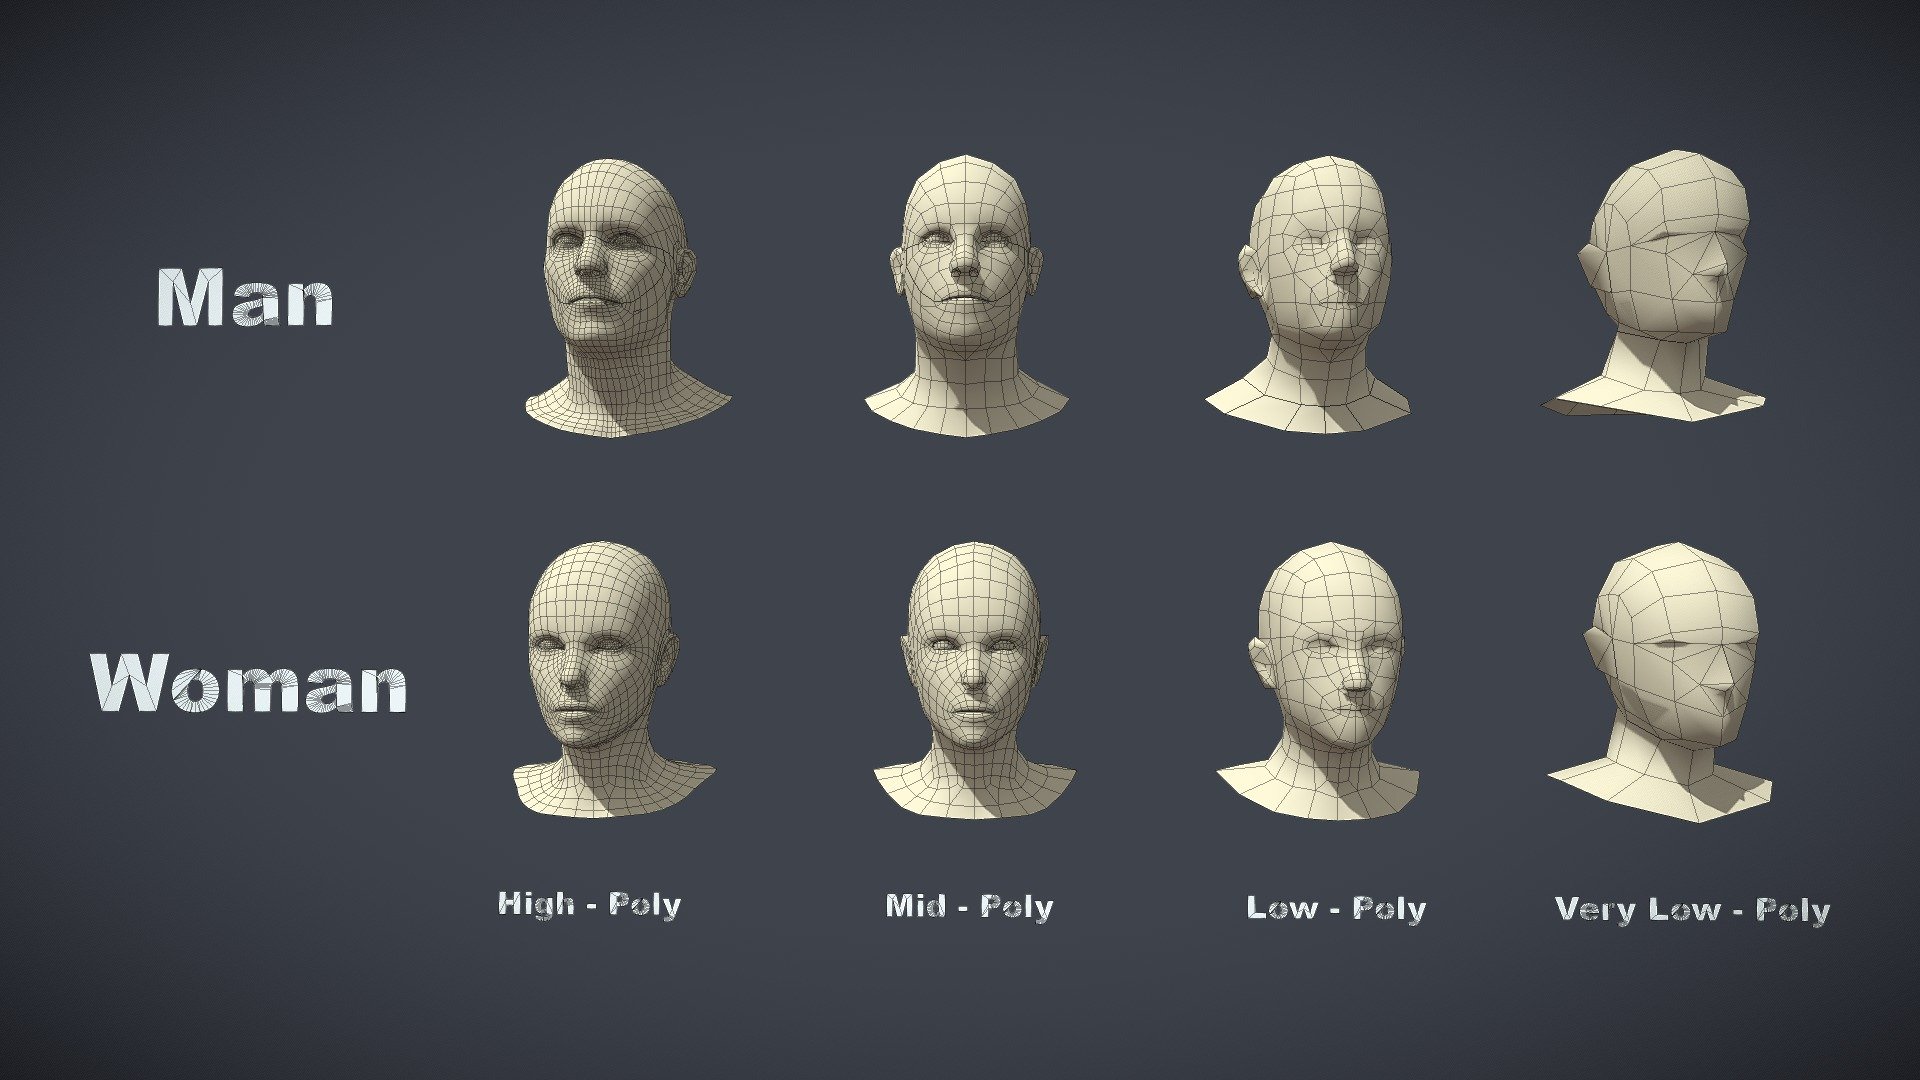 Hi everybody. Introducing to everyone 8 optimal head mesh sets of different versions: high-poly, mid-poly, low-poly, verylow-poly. There are both men and women. Convenient for rendering and artistic creation.



Package description:





Collection includes 8 head model files ( FBX ) 

Mesh amounts range from 194 tris to 11532 tris

The mesh part connects the wrist from 10, 12, 14, 18, 32, 38



Model reference hands: https://sketchfab.com/3d-models/hands-pack-14b5ec4abeed4de3a67243b2ba737819

Model reference Legs: https://sketchfab.com/3d-models/legs-pack-a0e55a2076d94fb3a0205134ad266dd6



Contact me for support. Hope to receive feedback from everyone. Thank - Head Pack - Download Free 3D model by DuNguyn - Assets store (@nguyenvuduc2000) 3d model